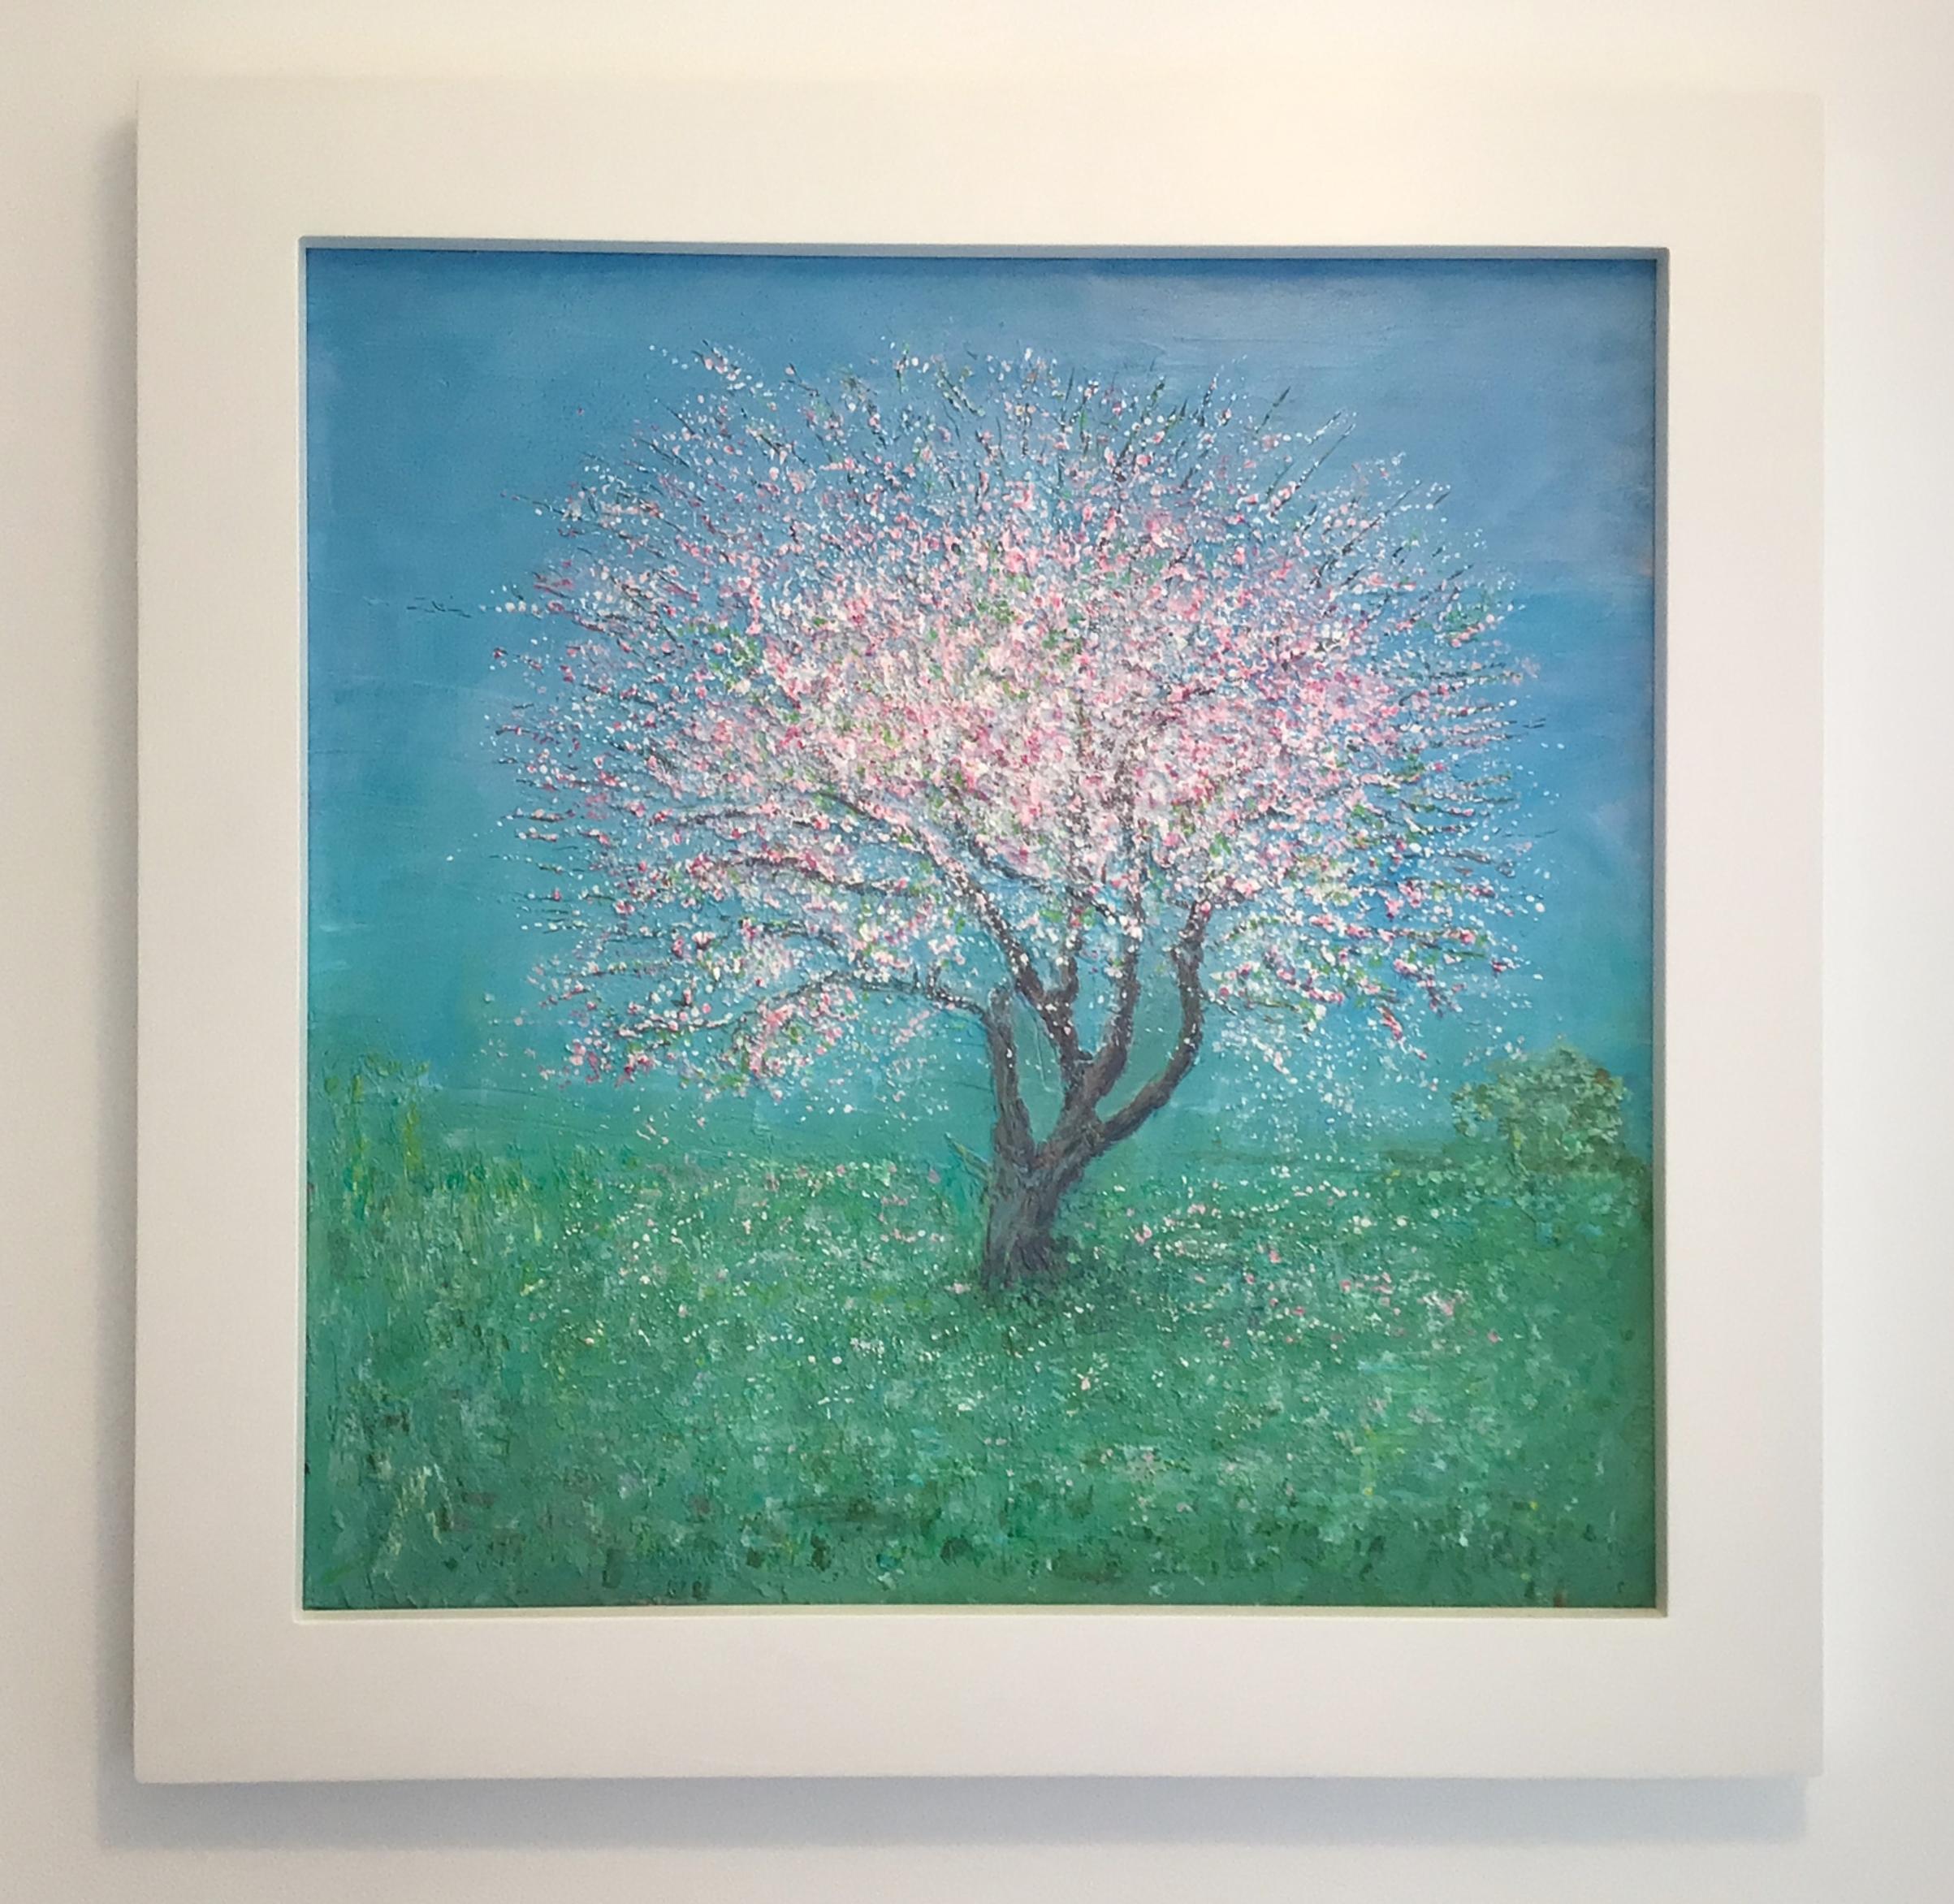 'Apple Blossom'
Acrylic and marble plaster on canvas board.  Framed
Image size 60x60 cm. 23.5